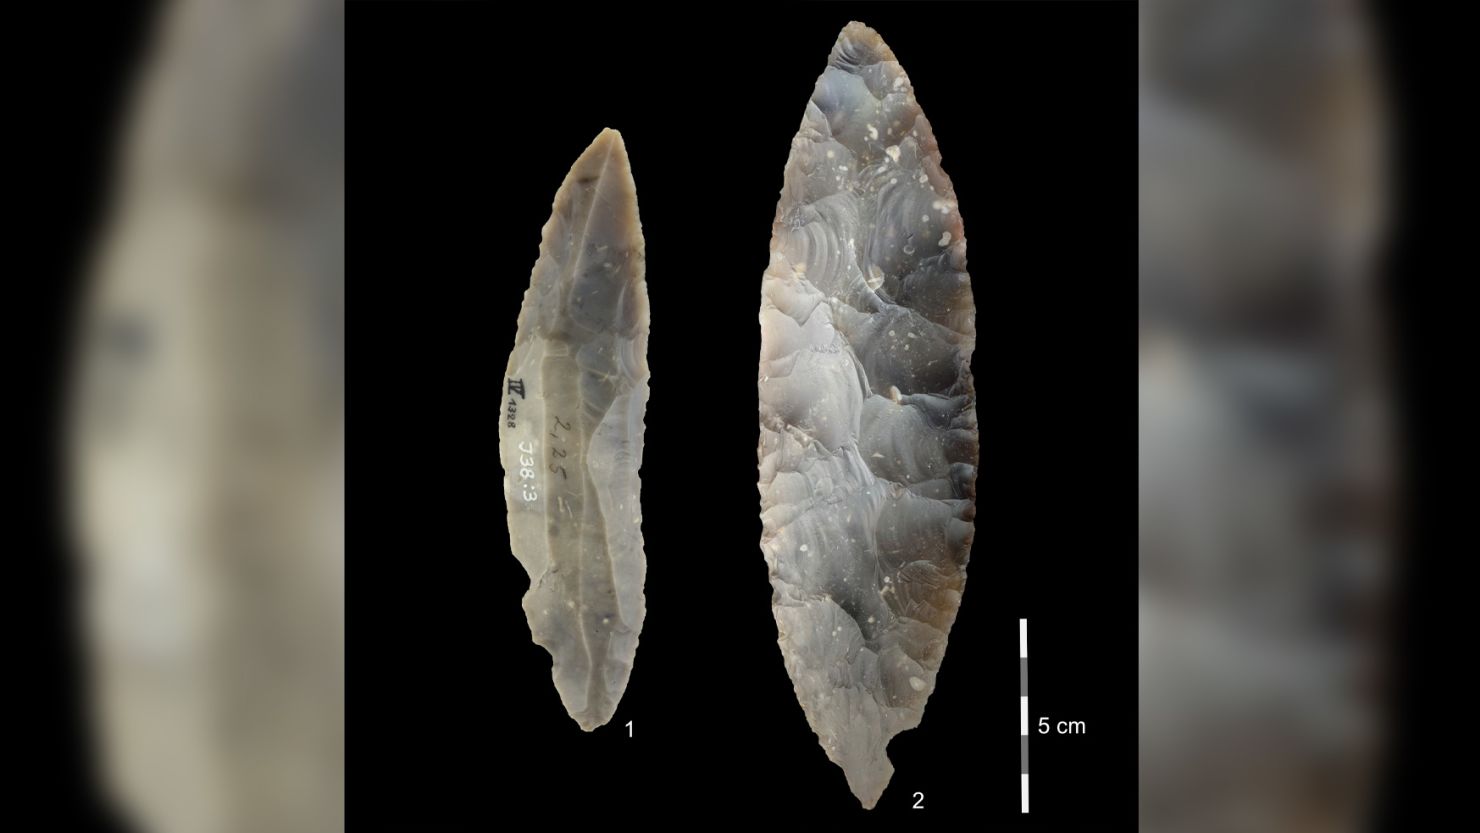 Archaeologists had long thought the distinctive leaf-shaped stone tools were made by Neanderthals. A new study suggests they were made by Homo sapiens.